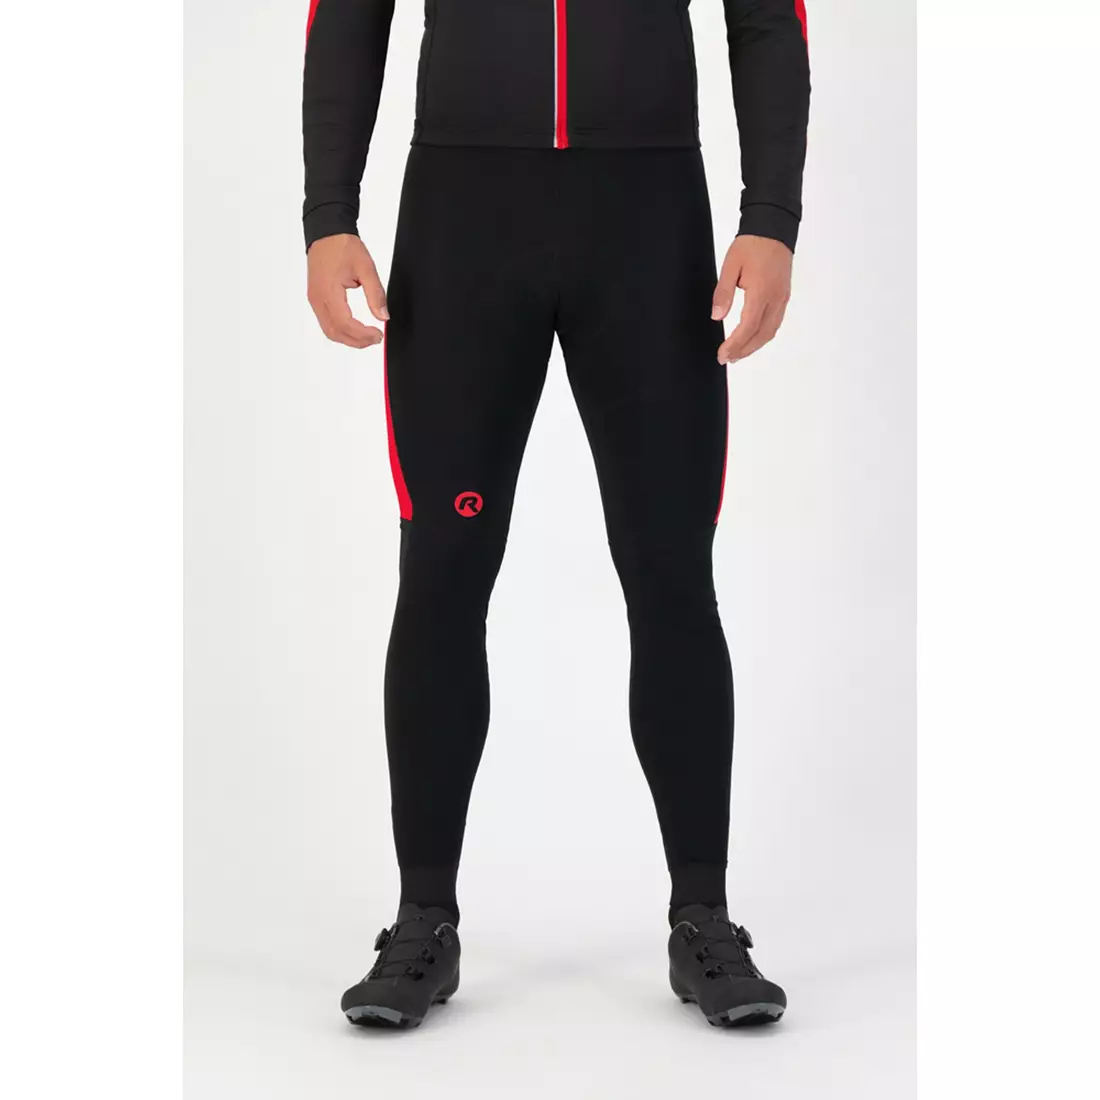 Rogelli Men's warm cycling trousers with braces TYRO, Red, ROG351019